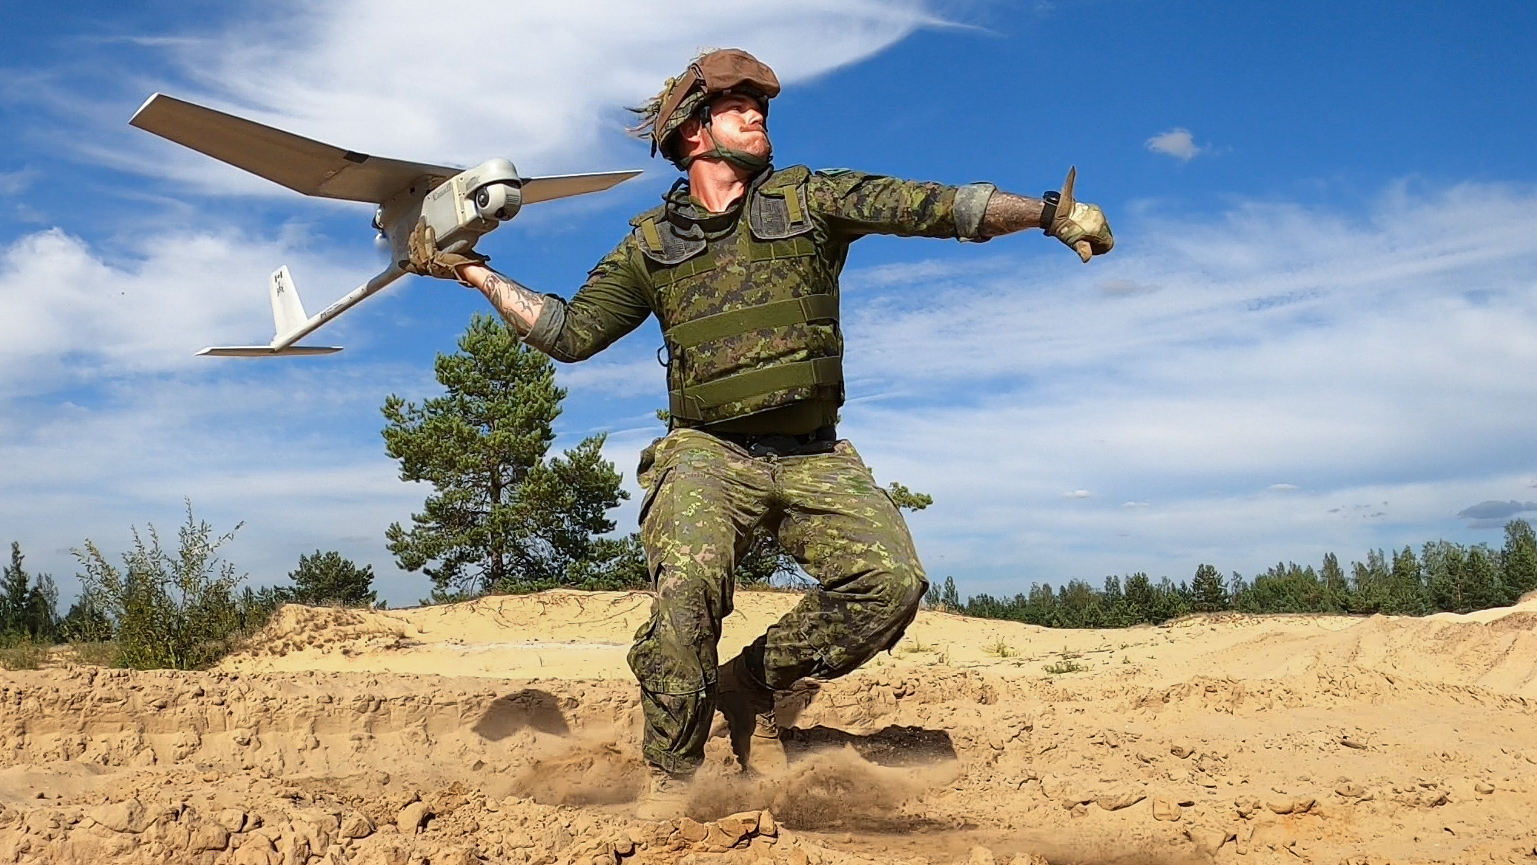 MDA’s RAVEN UAV is in service with the Canadian Army and RCN